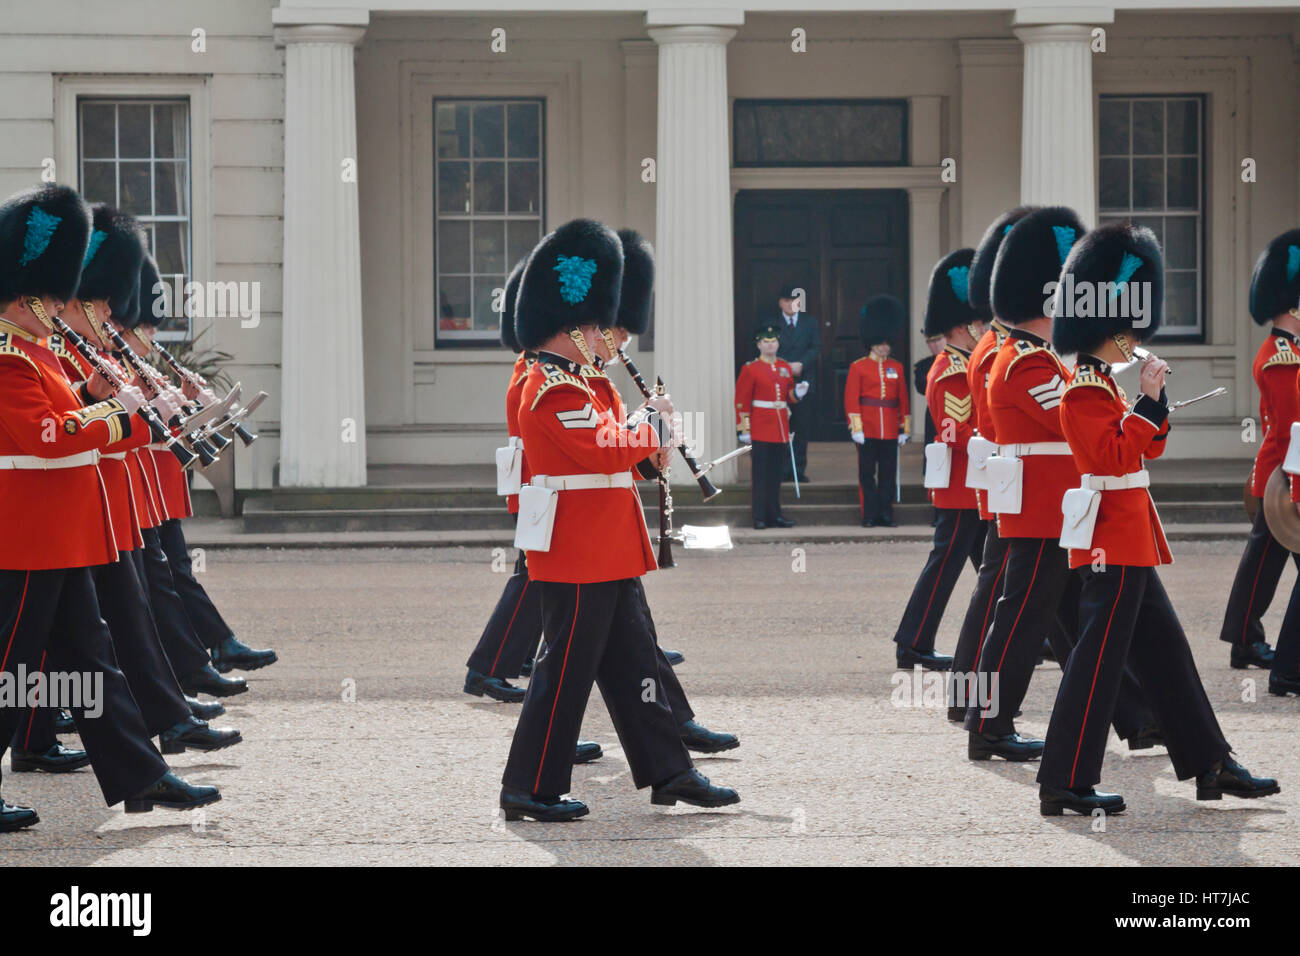 The Queens Band Practices Near Buckingham Palace, London, England Stock Photo